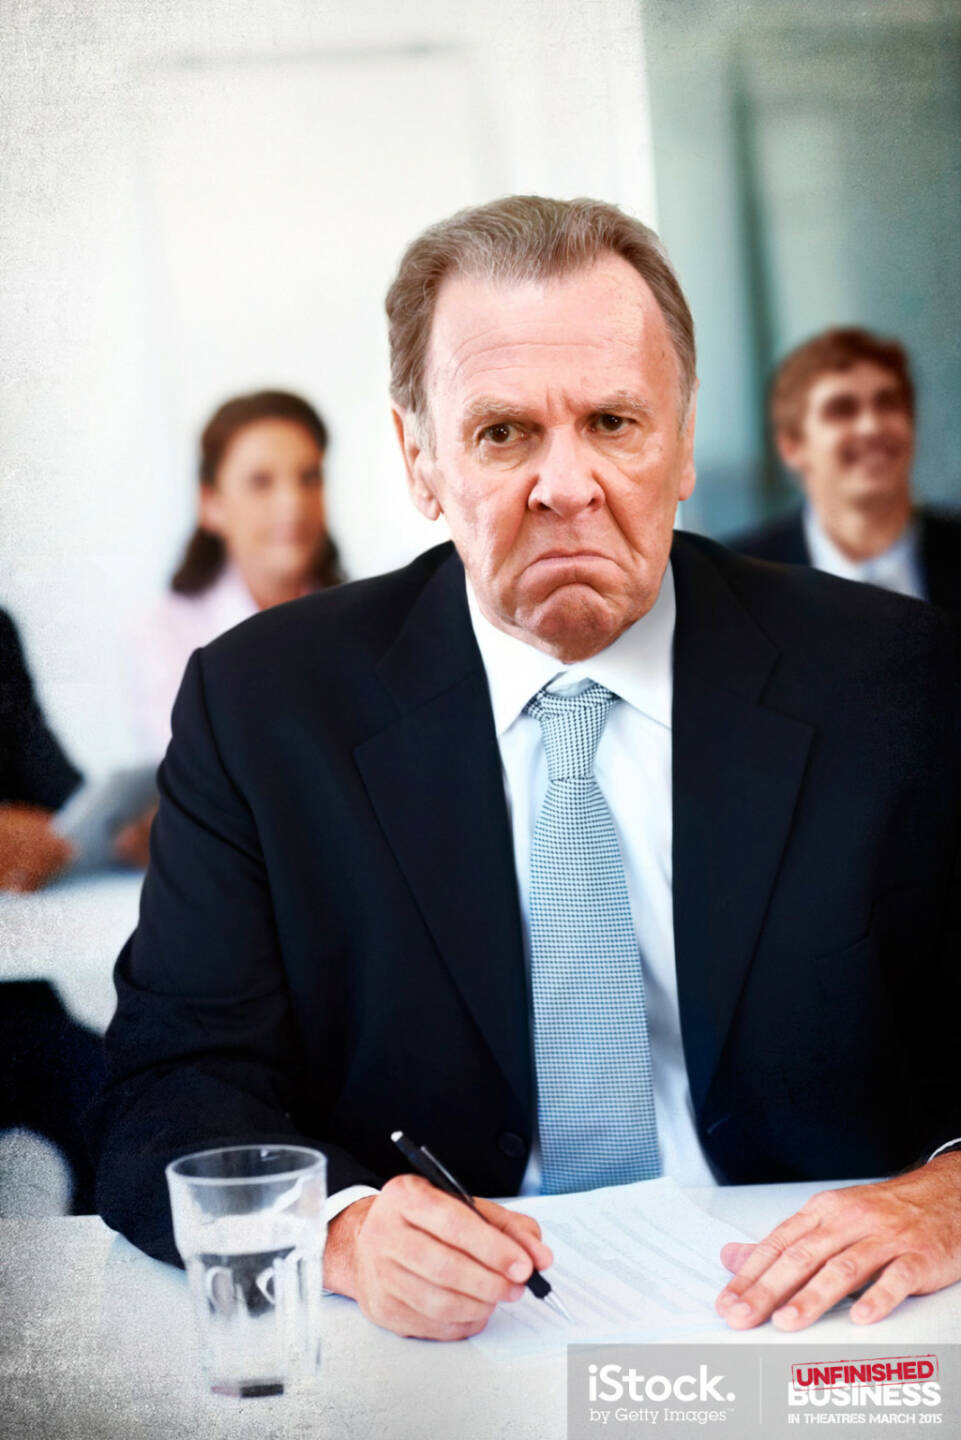 Timothy McWinters is not an impressed business man, iStock, Getty Images